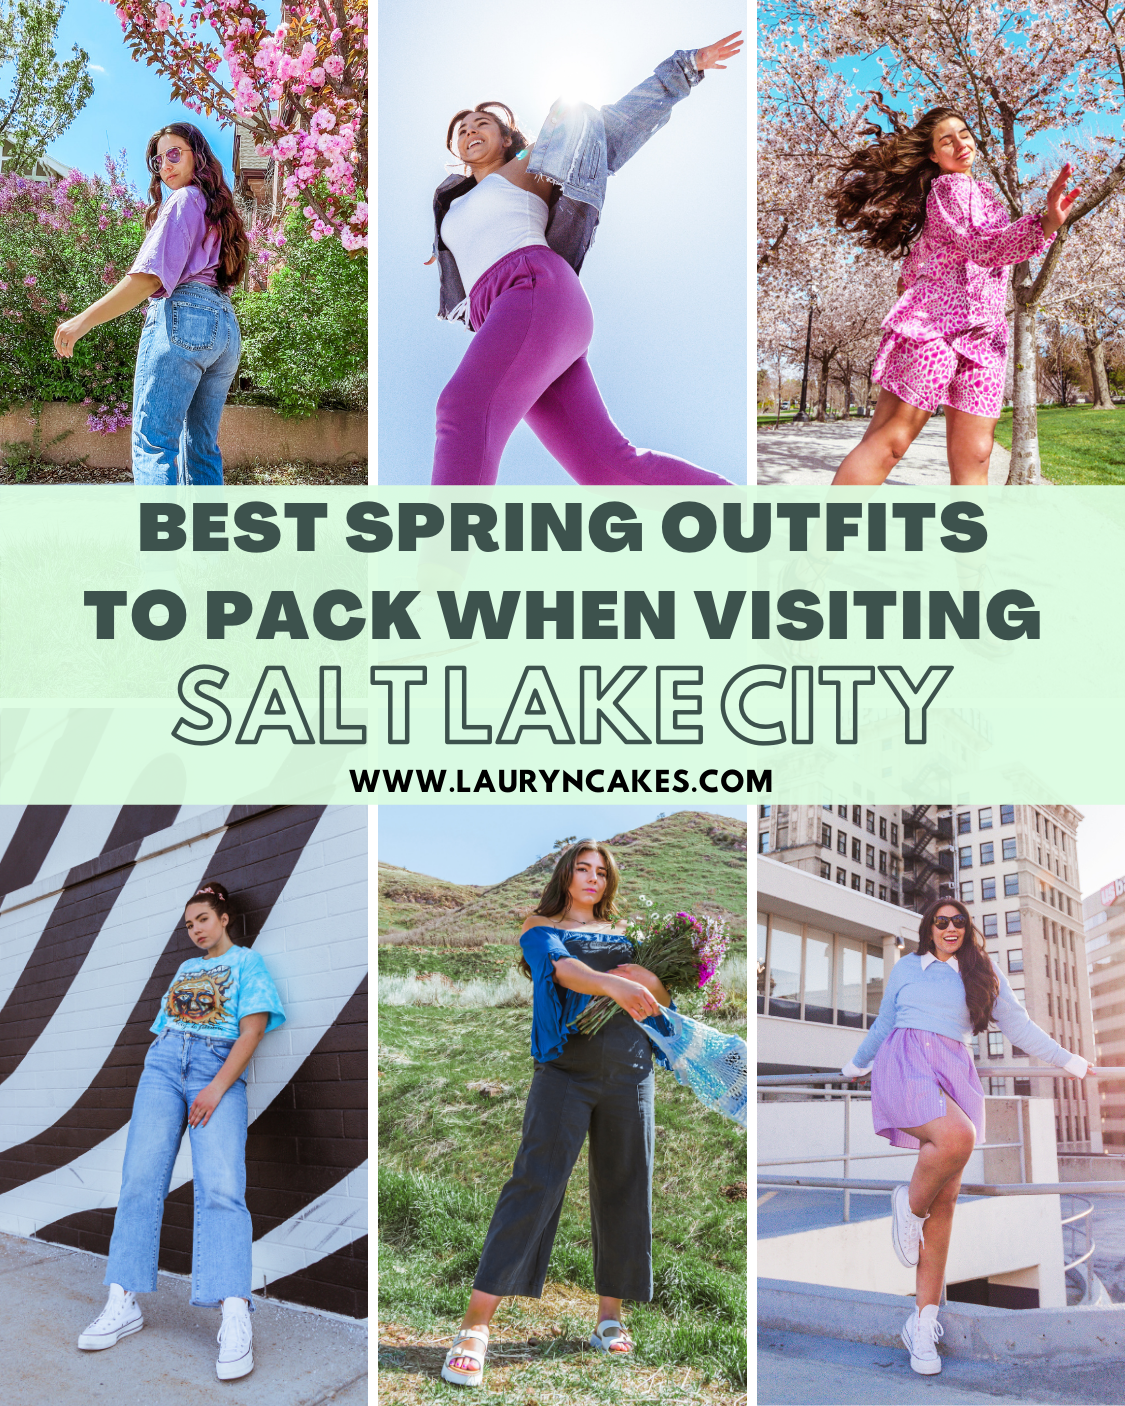 6 fashion outfits with the words, "best spring outfits to pack when visiting salt lake city" on it